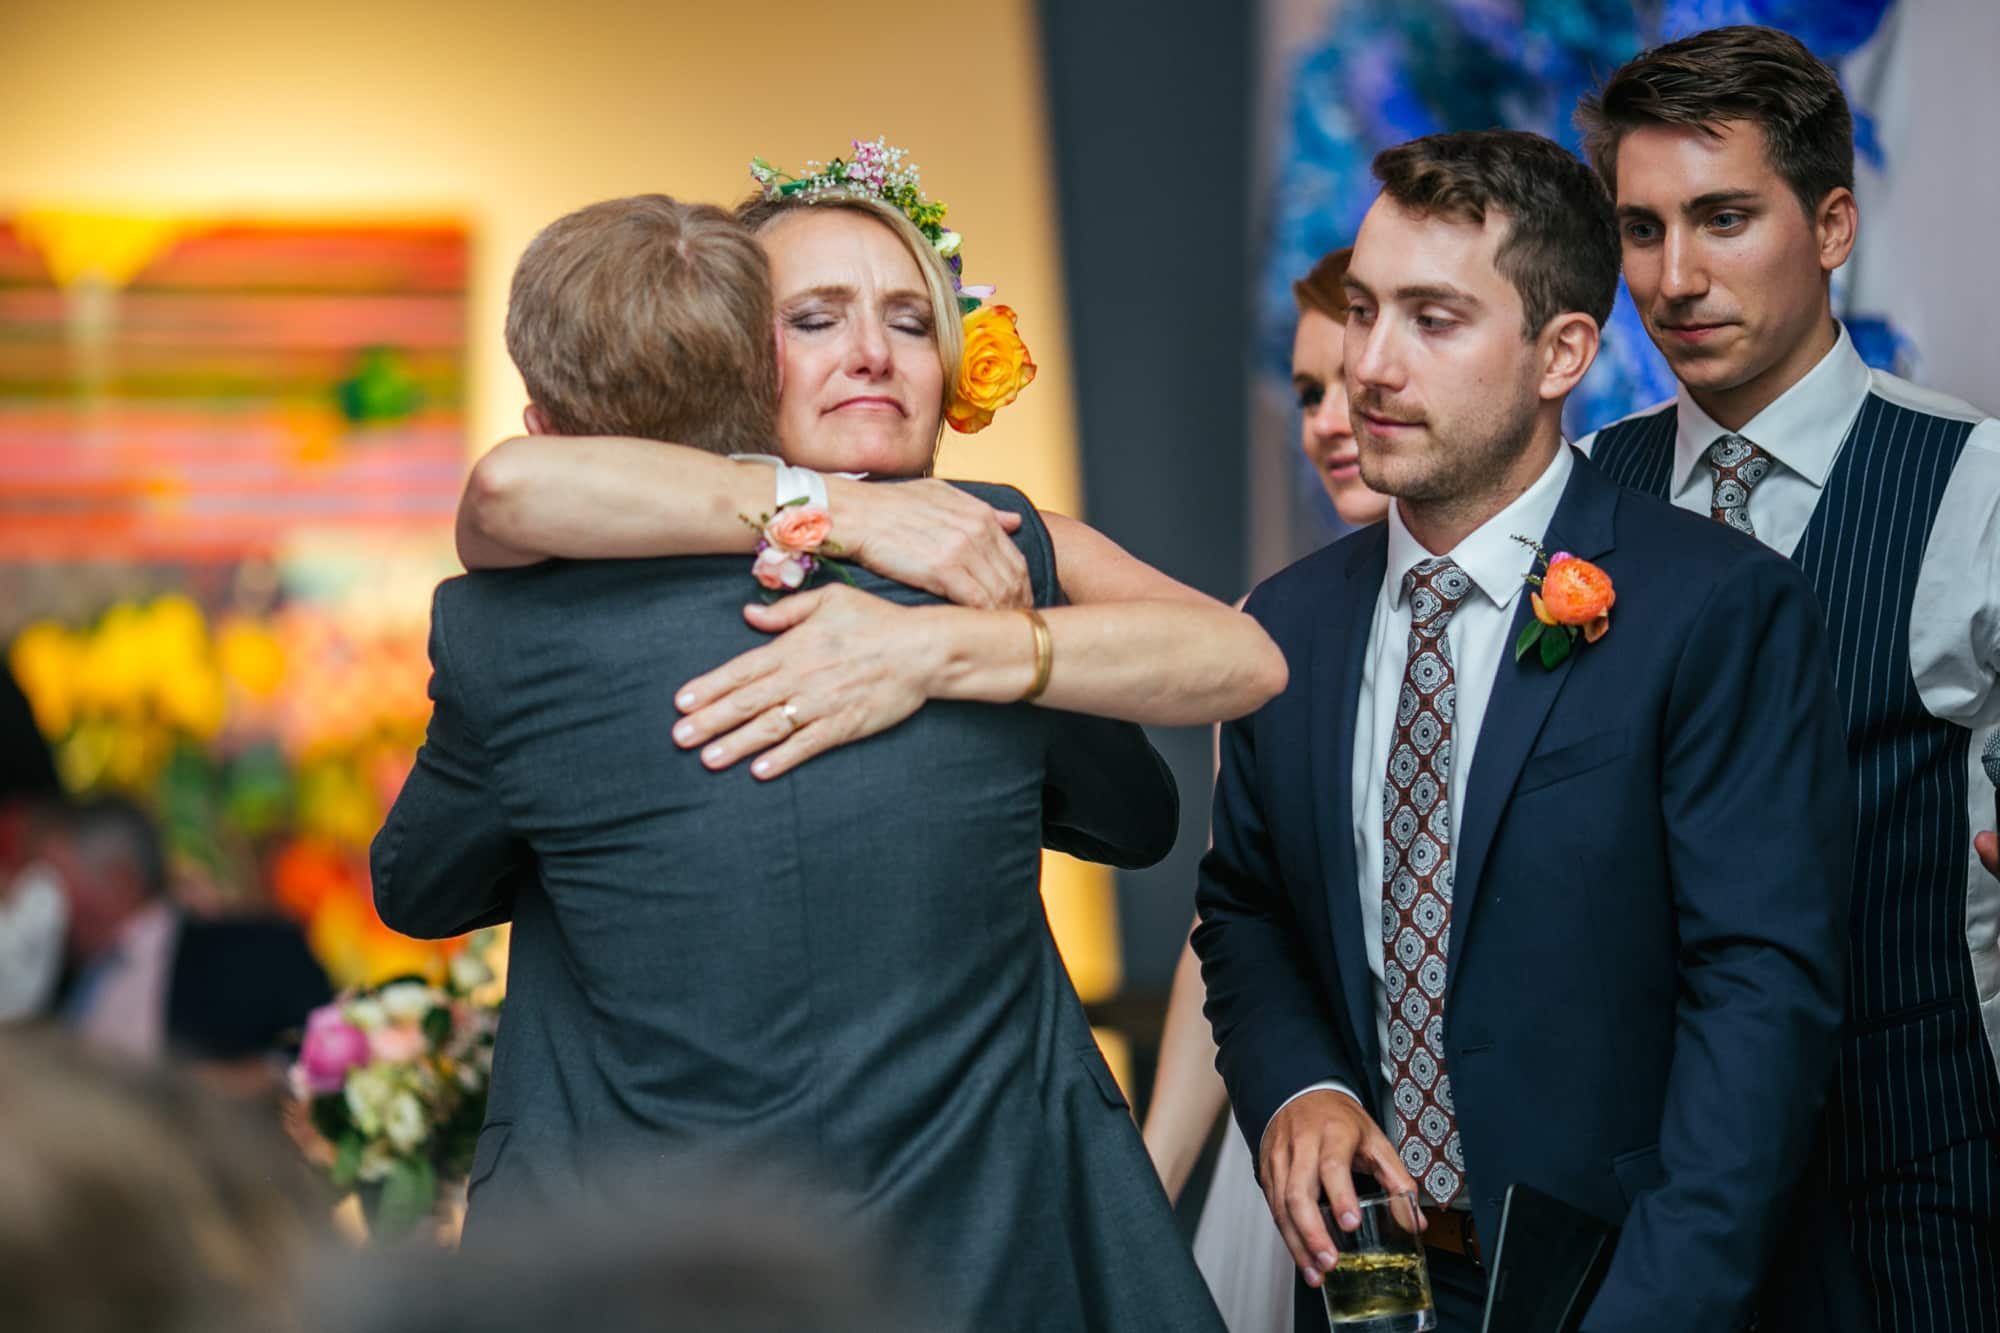 mom and son, mother of the groom, both families hugging, happy family